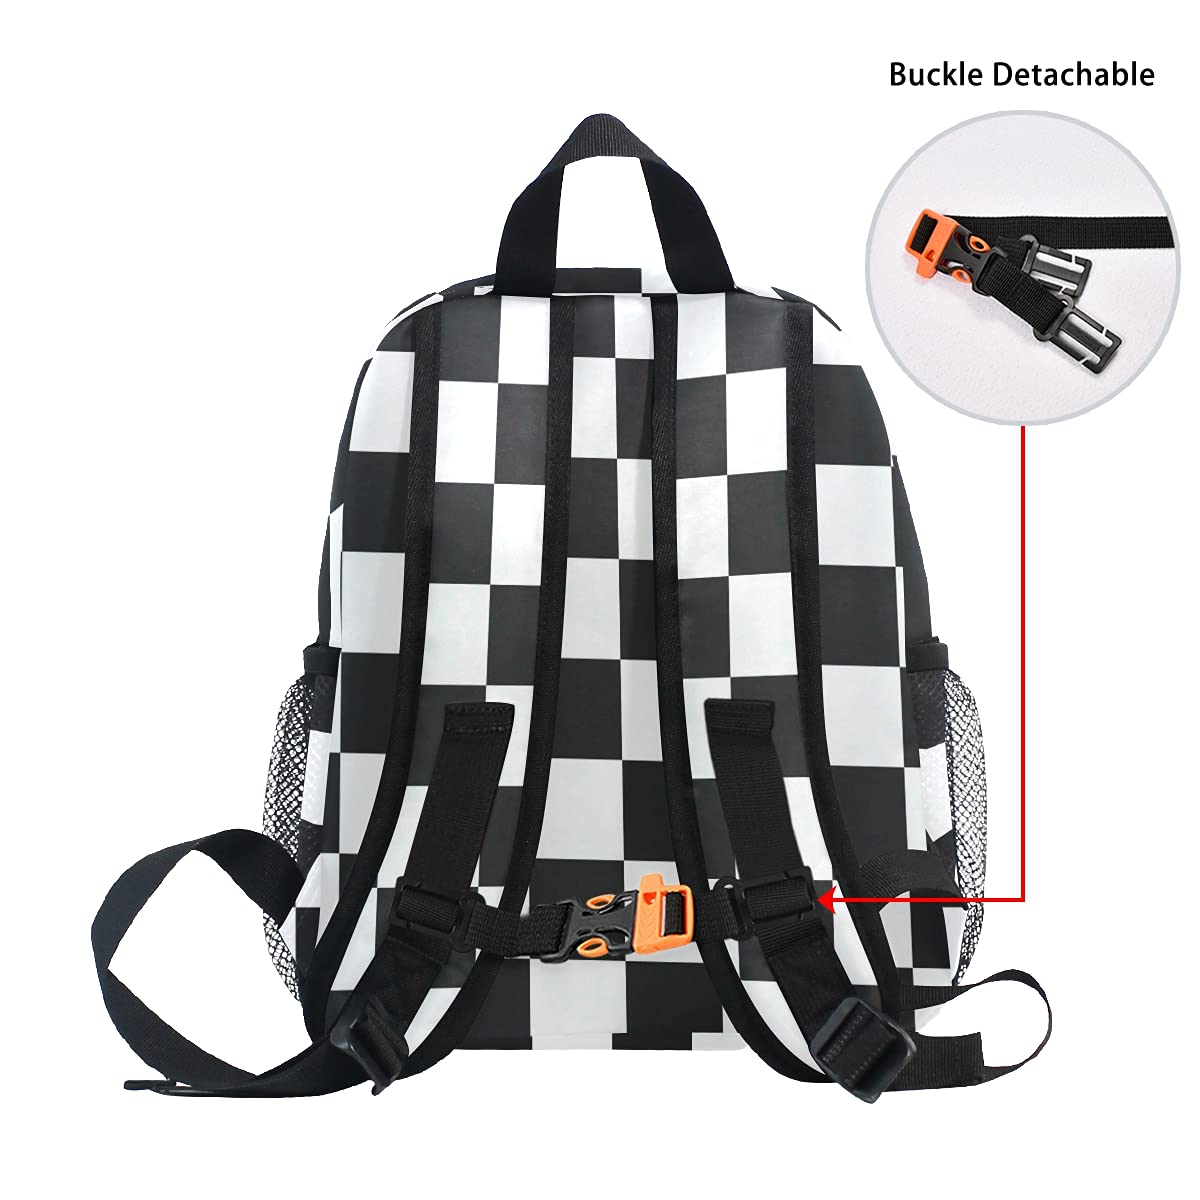 ODAWA Custom Black and White Checkerboard Backpack for Boys Girls, Personalized Backpack with Name/Text, Customization Preschool Backpack Kindergarten